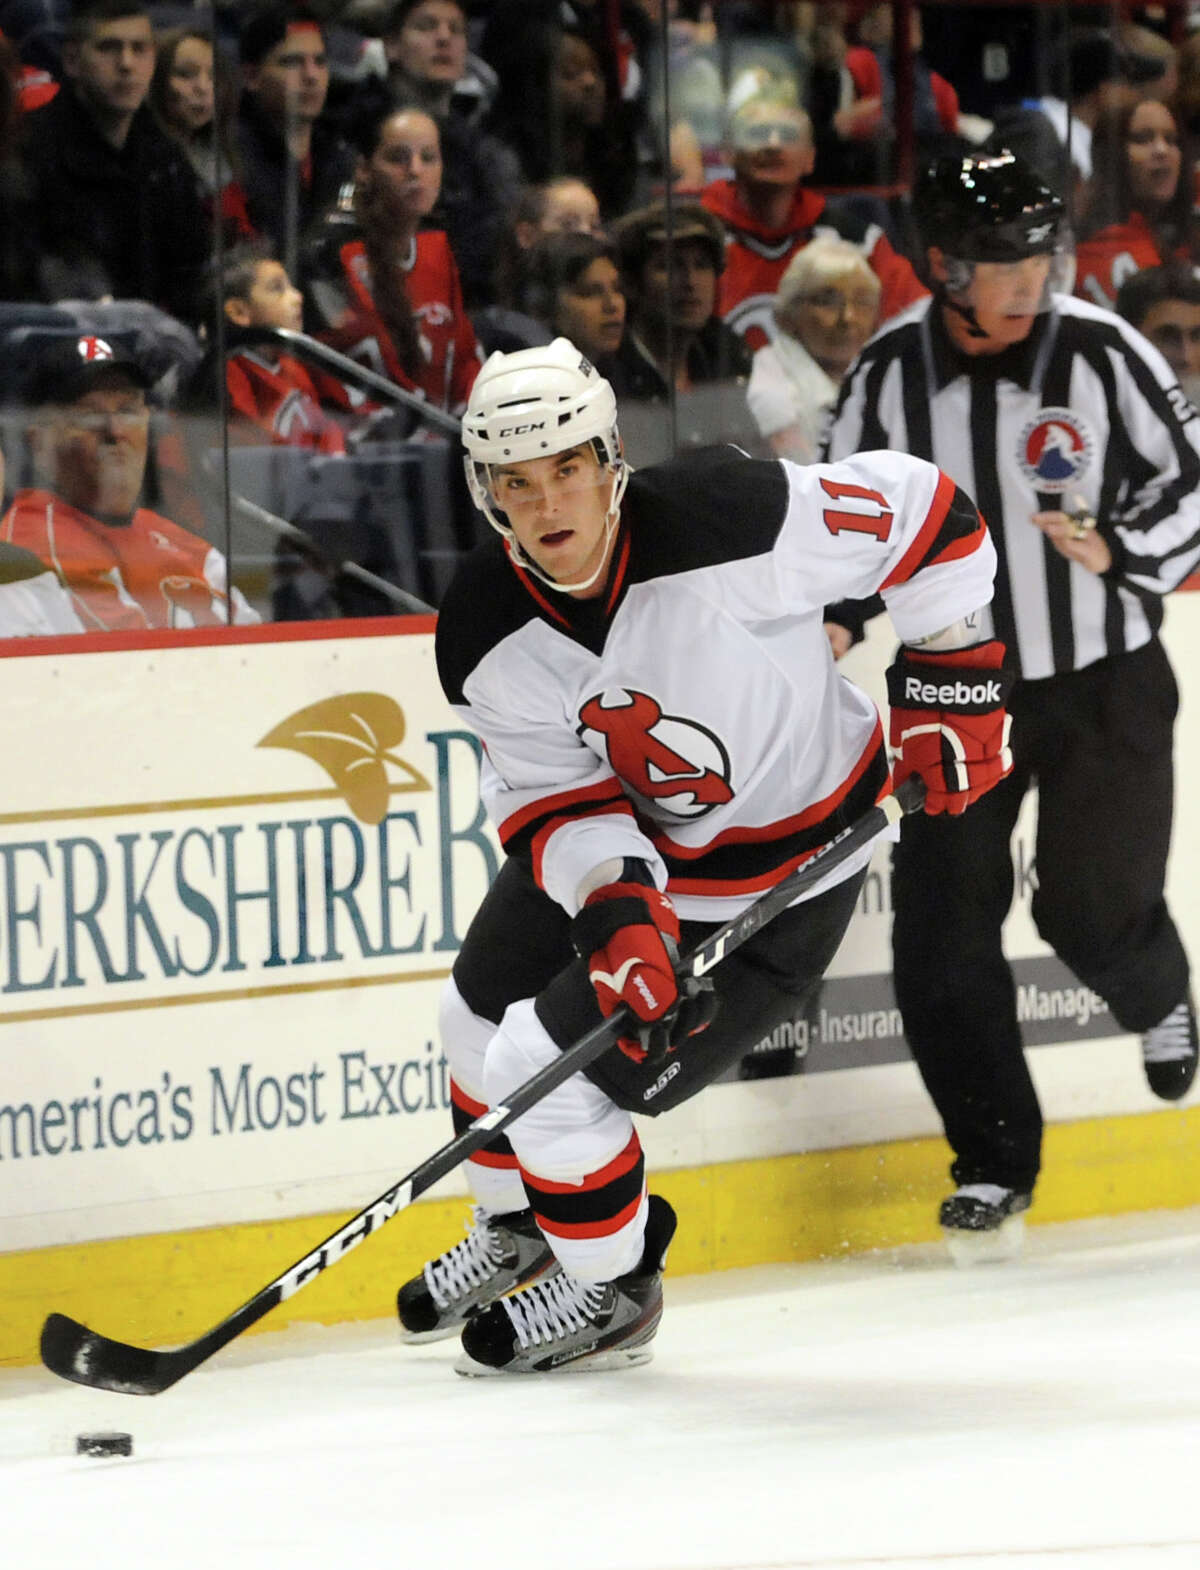 Albany Devil's Bobby Butler (11) looks to shoot during their hockey game against the Manchester Monarchs on Saturday, Oct. 13, 2012, at Times Union Center in Albany, N.Y. (Cindy Schultz / Times Union)